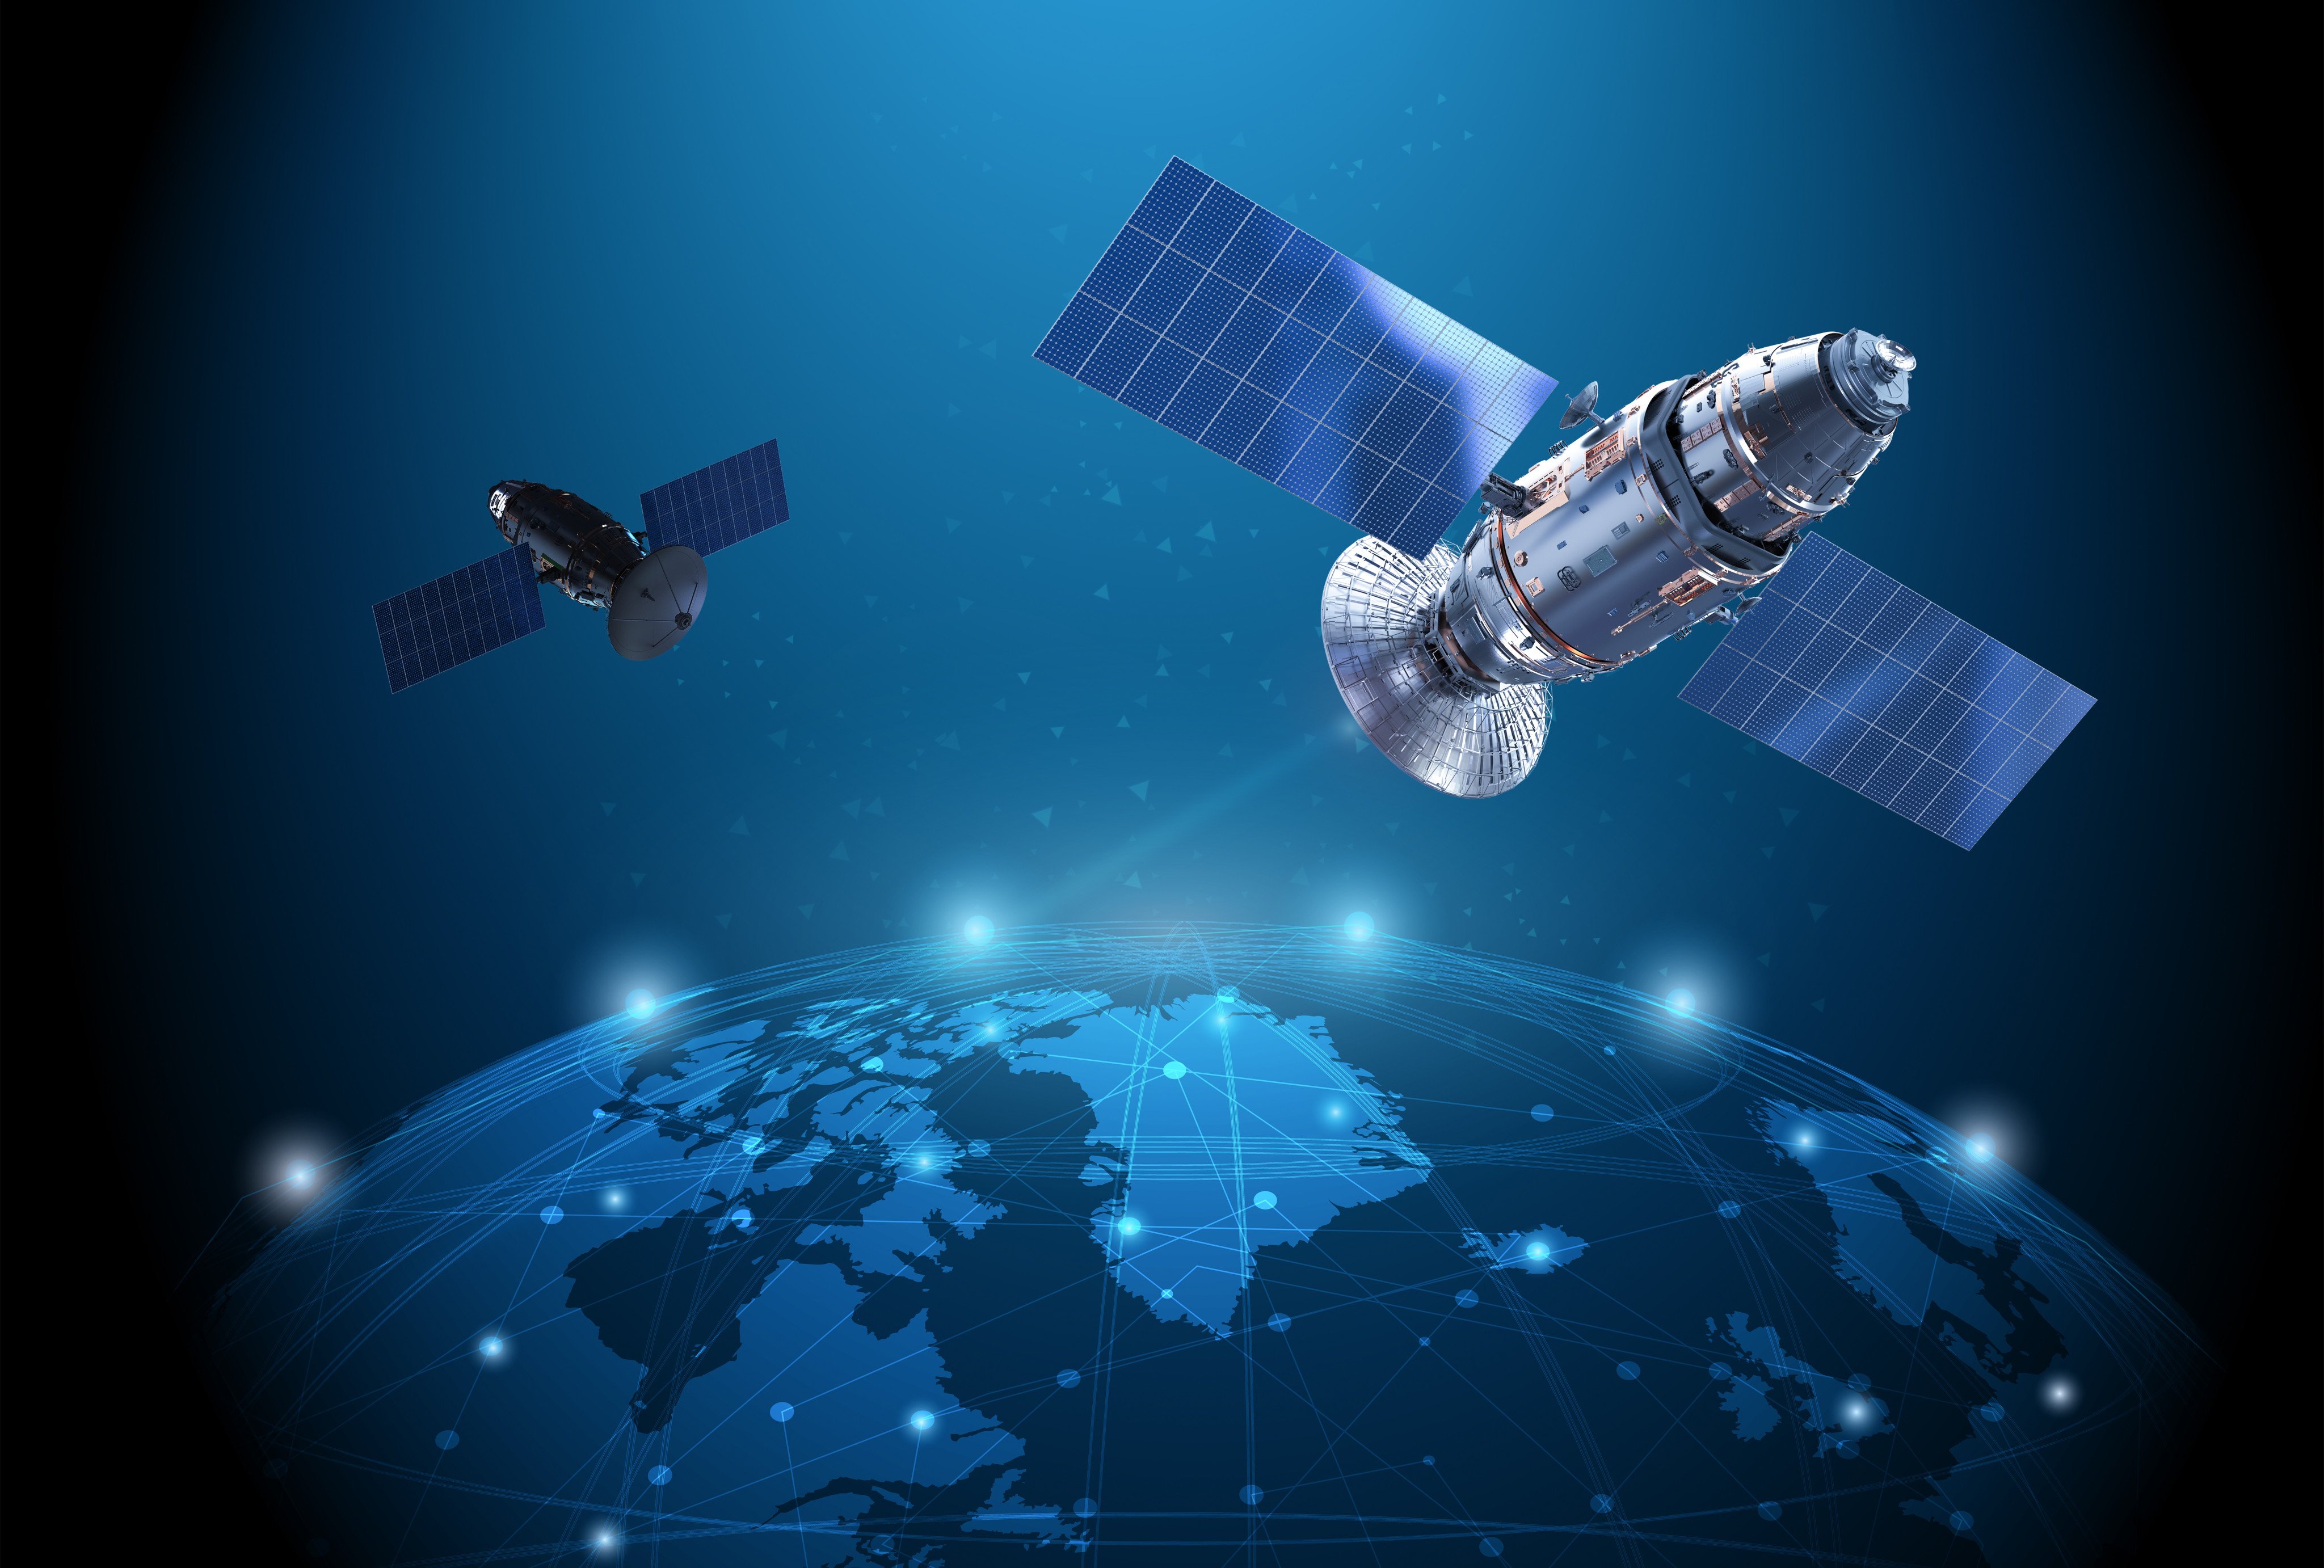 A small Chinese satellite was directed by artificial intelligence to observe sites in India and Japan, according to a research paper. Photo: Shutterstock
